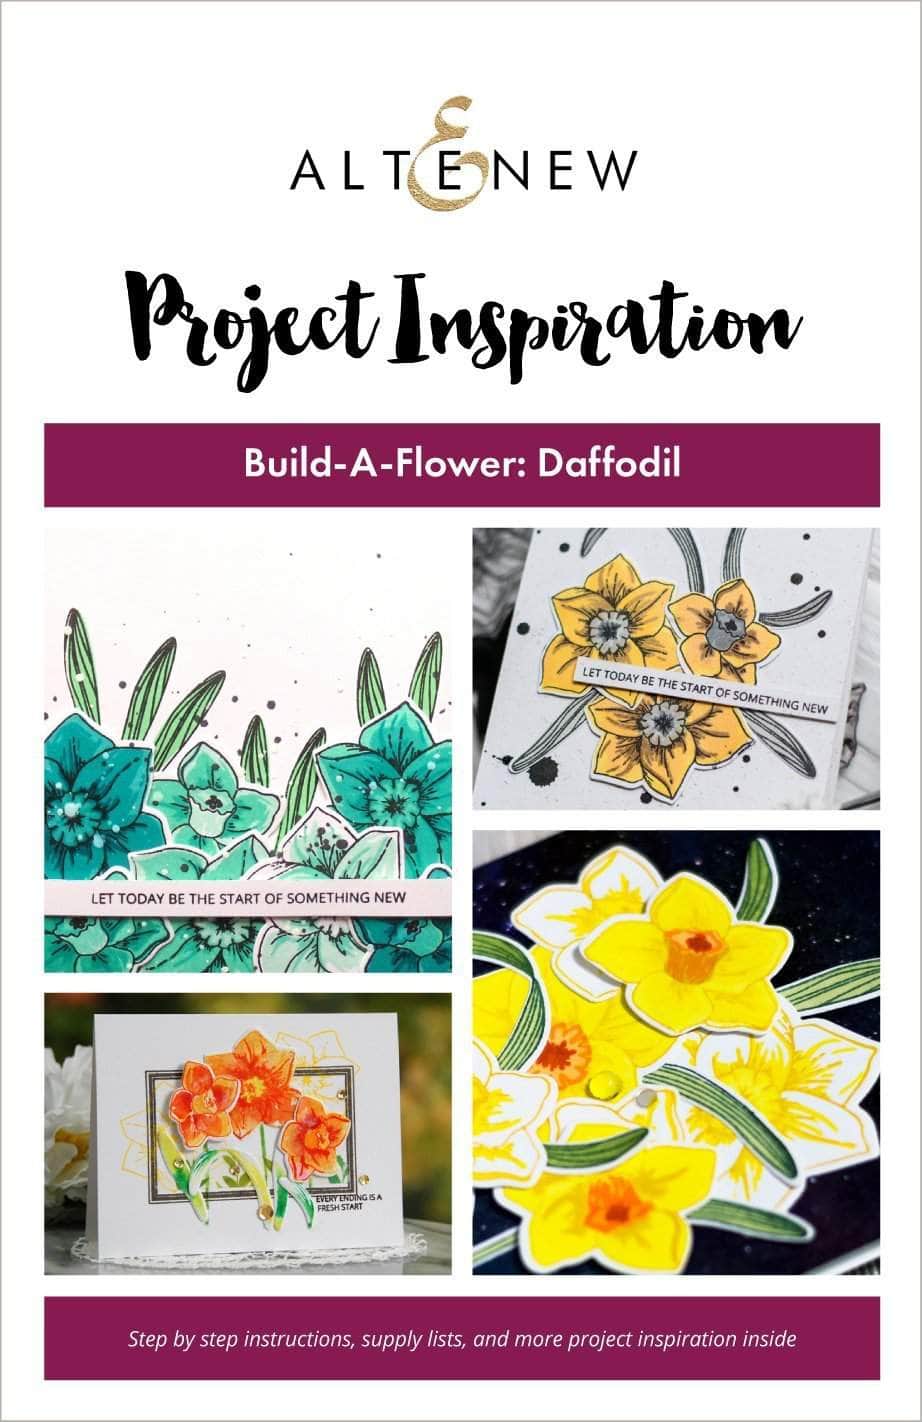 Printed Media Build-A-Flower: Daffodil Project Inspiration Guide